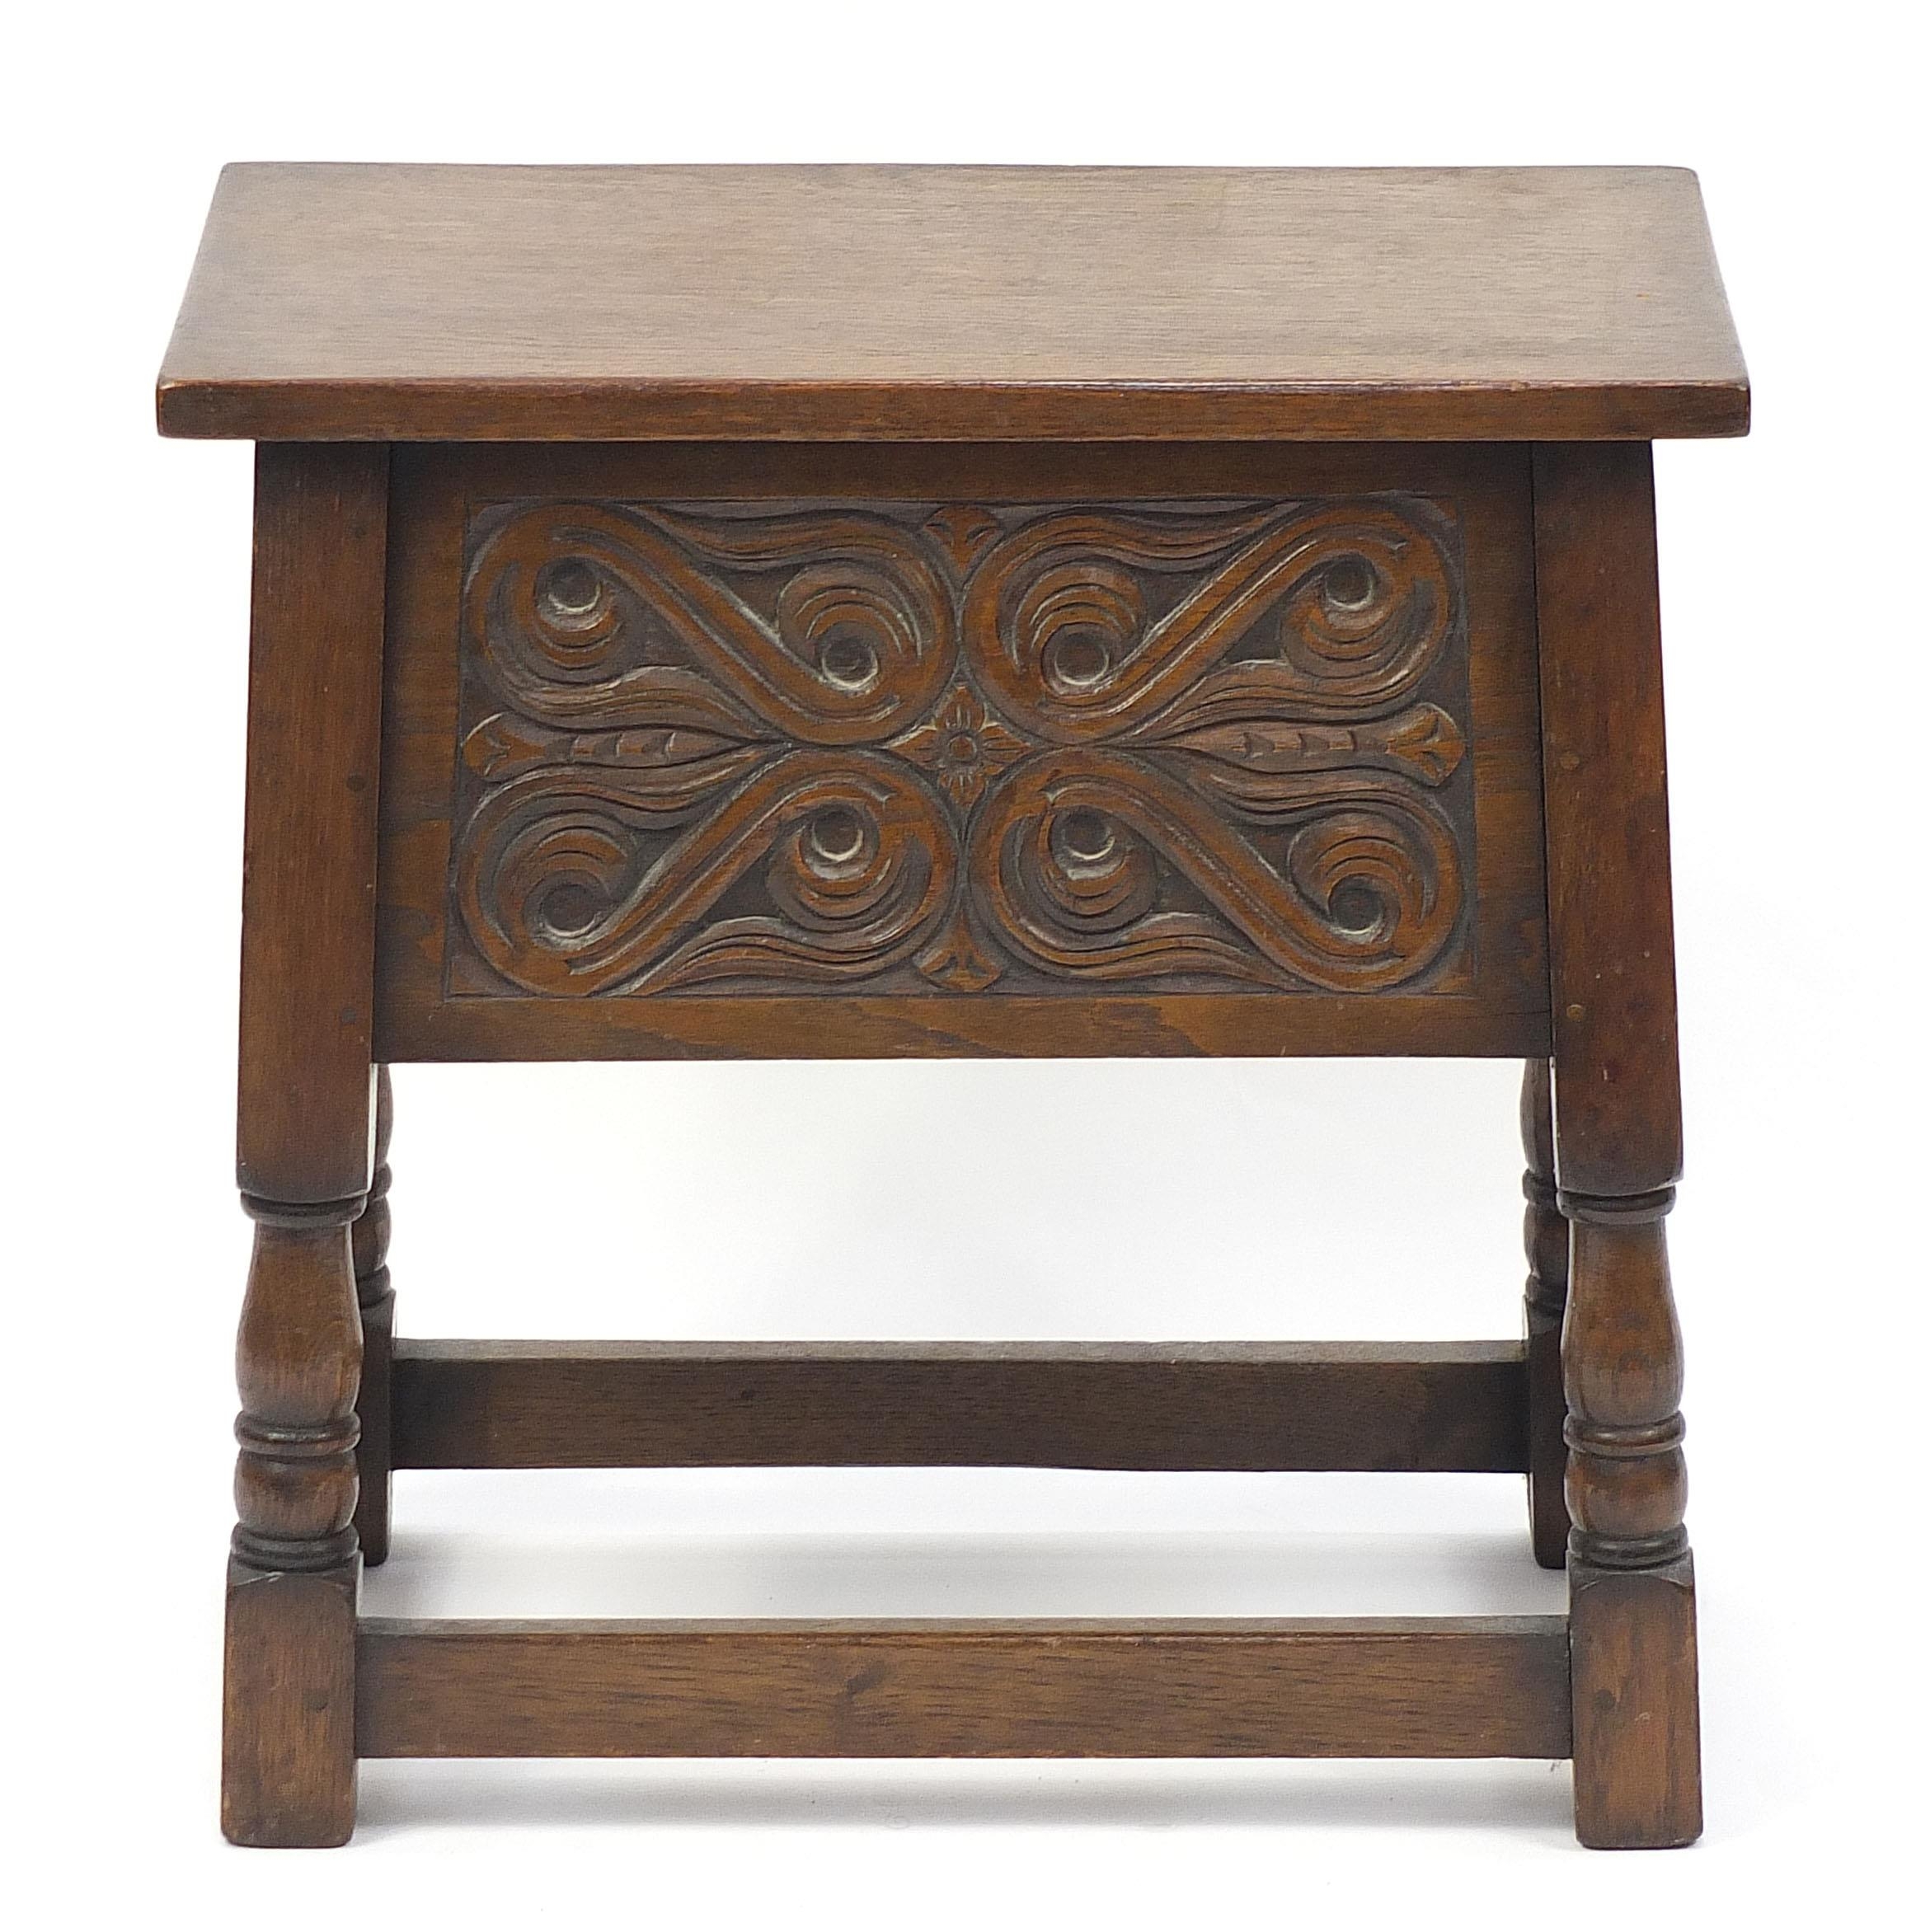 Carved oak work table with hinged lid, 50cm H x 51cm W x 31cm D - Image 2 of 4